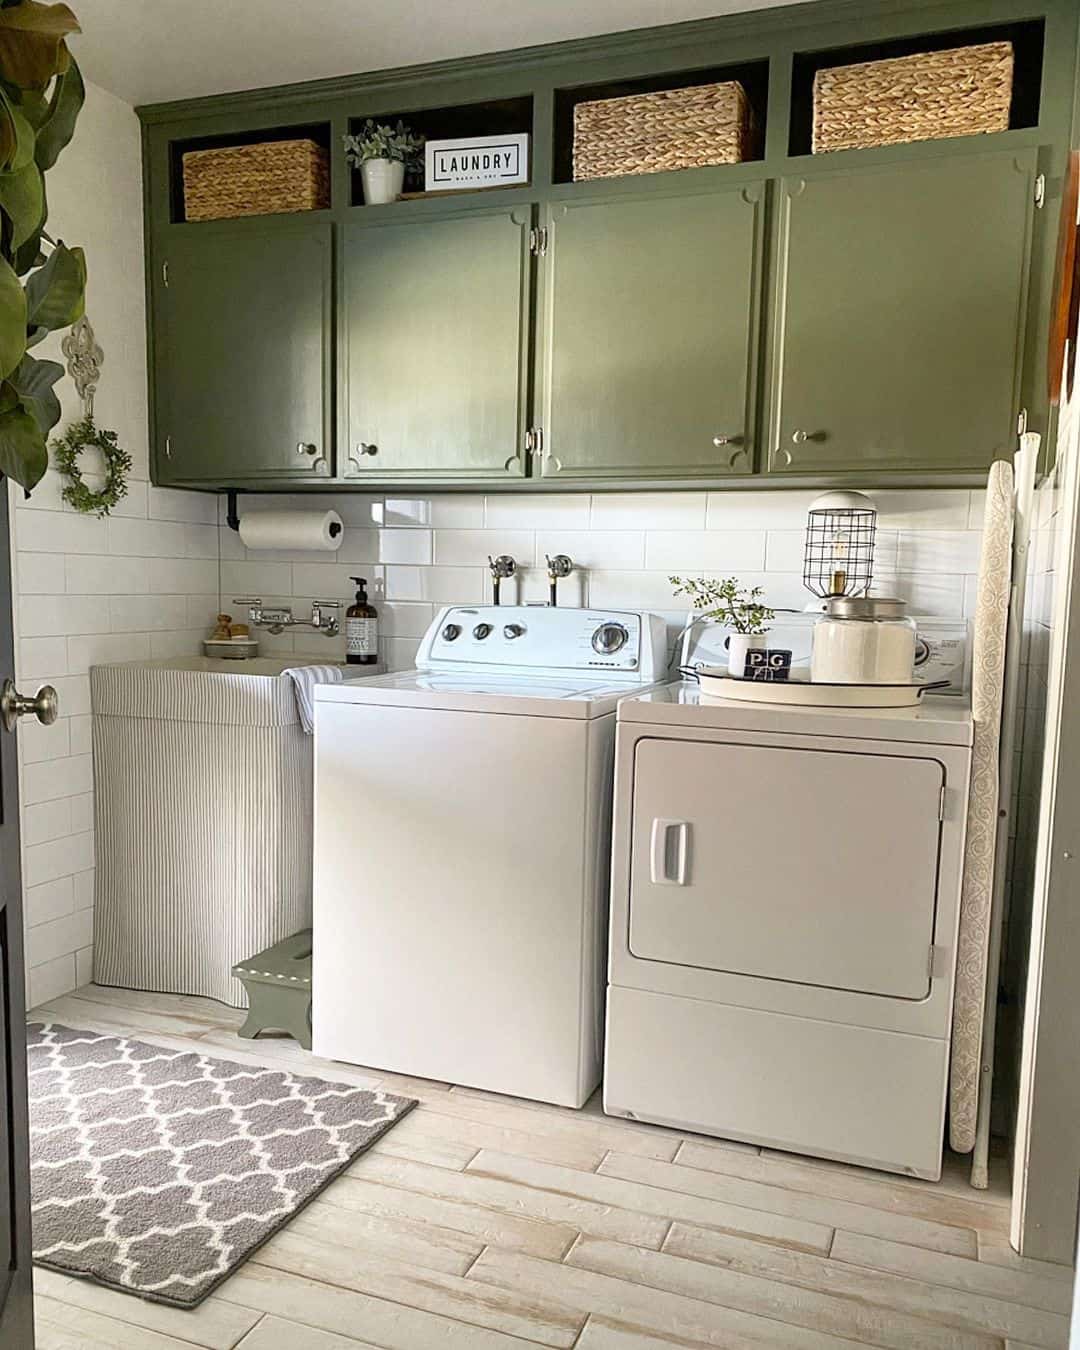 Green Cabinets and a Wood Tile Floor - Soul & Lane